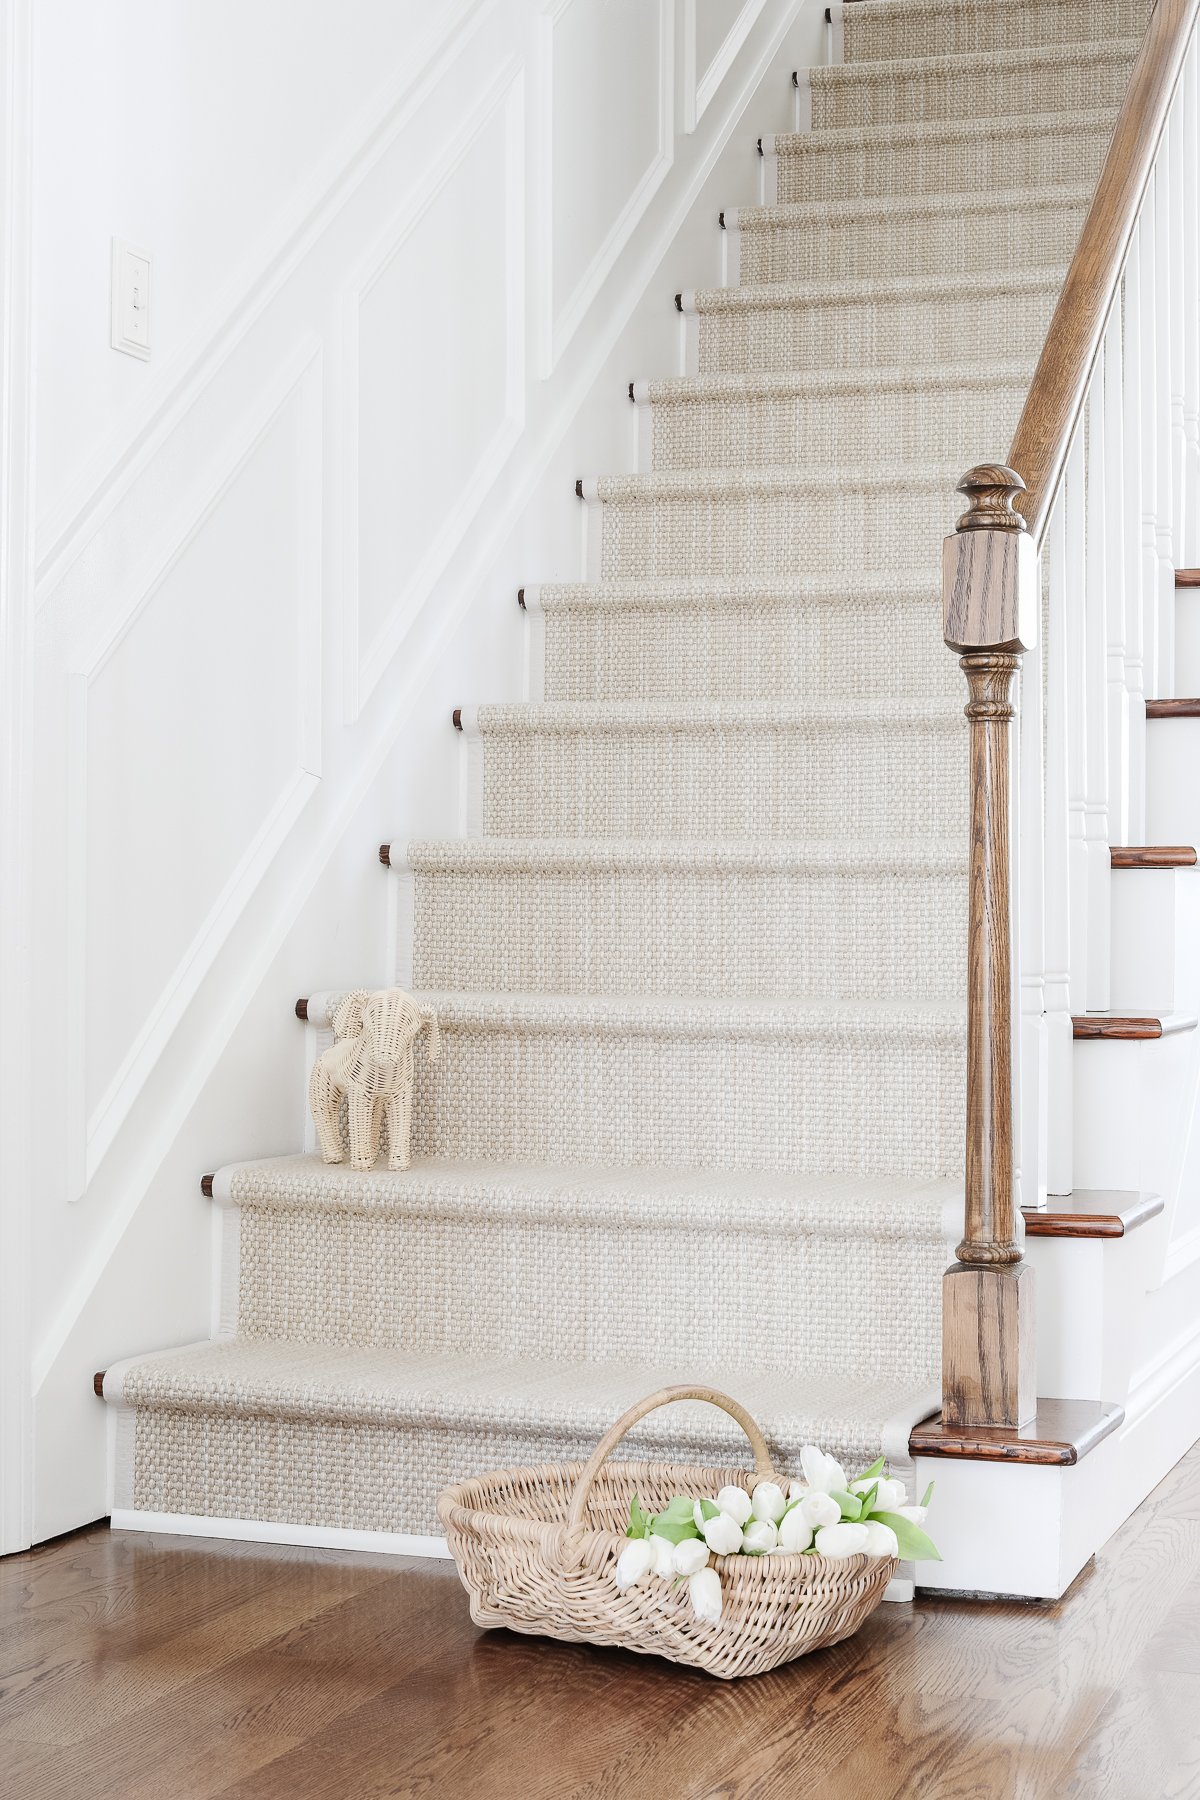 A diy stair runner in a soft neutral color, with a rattan puppy on a step.